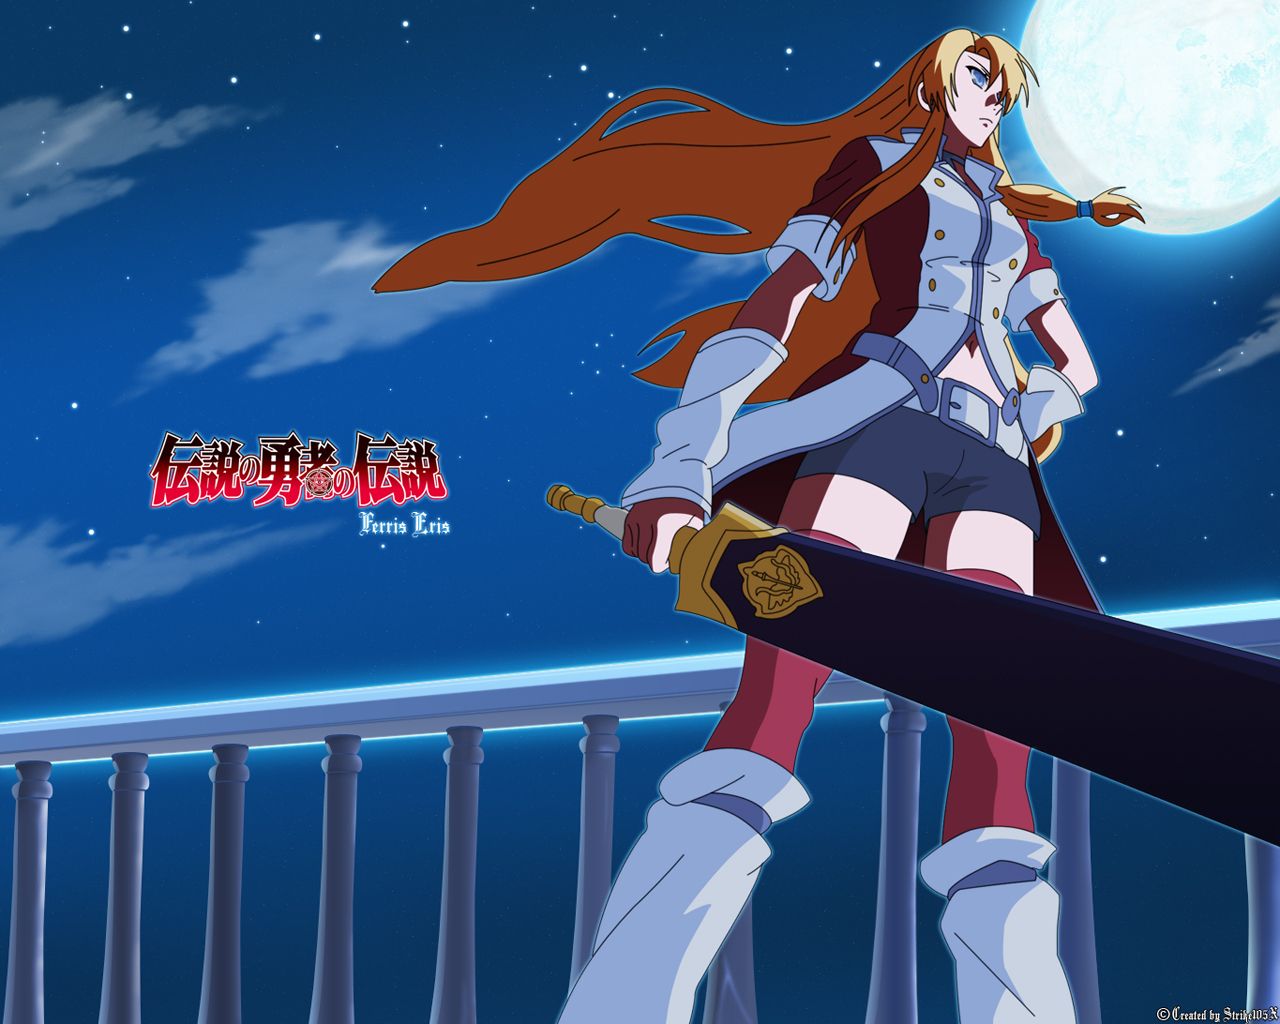 Anime picture legend of the legendary heroes 2000x1601 183934 it